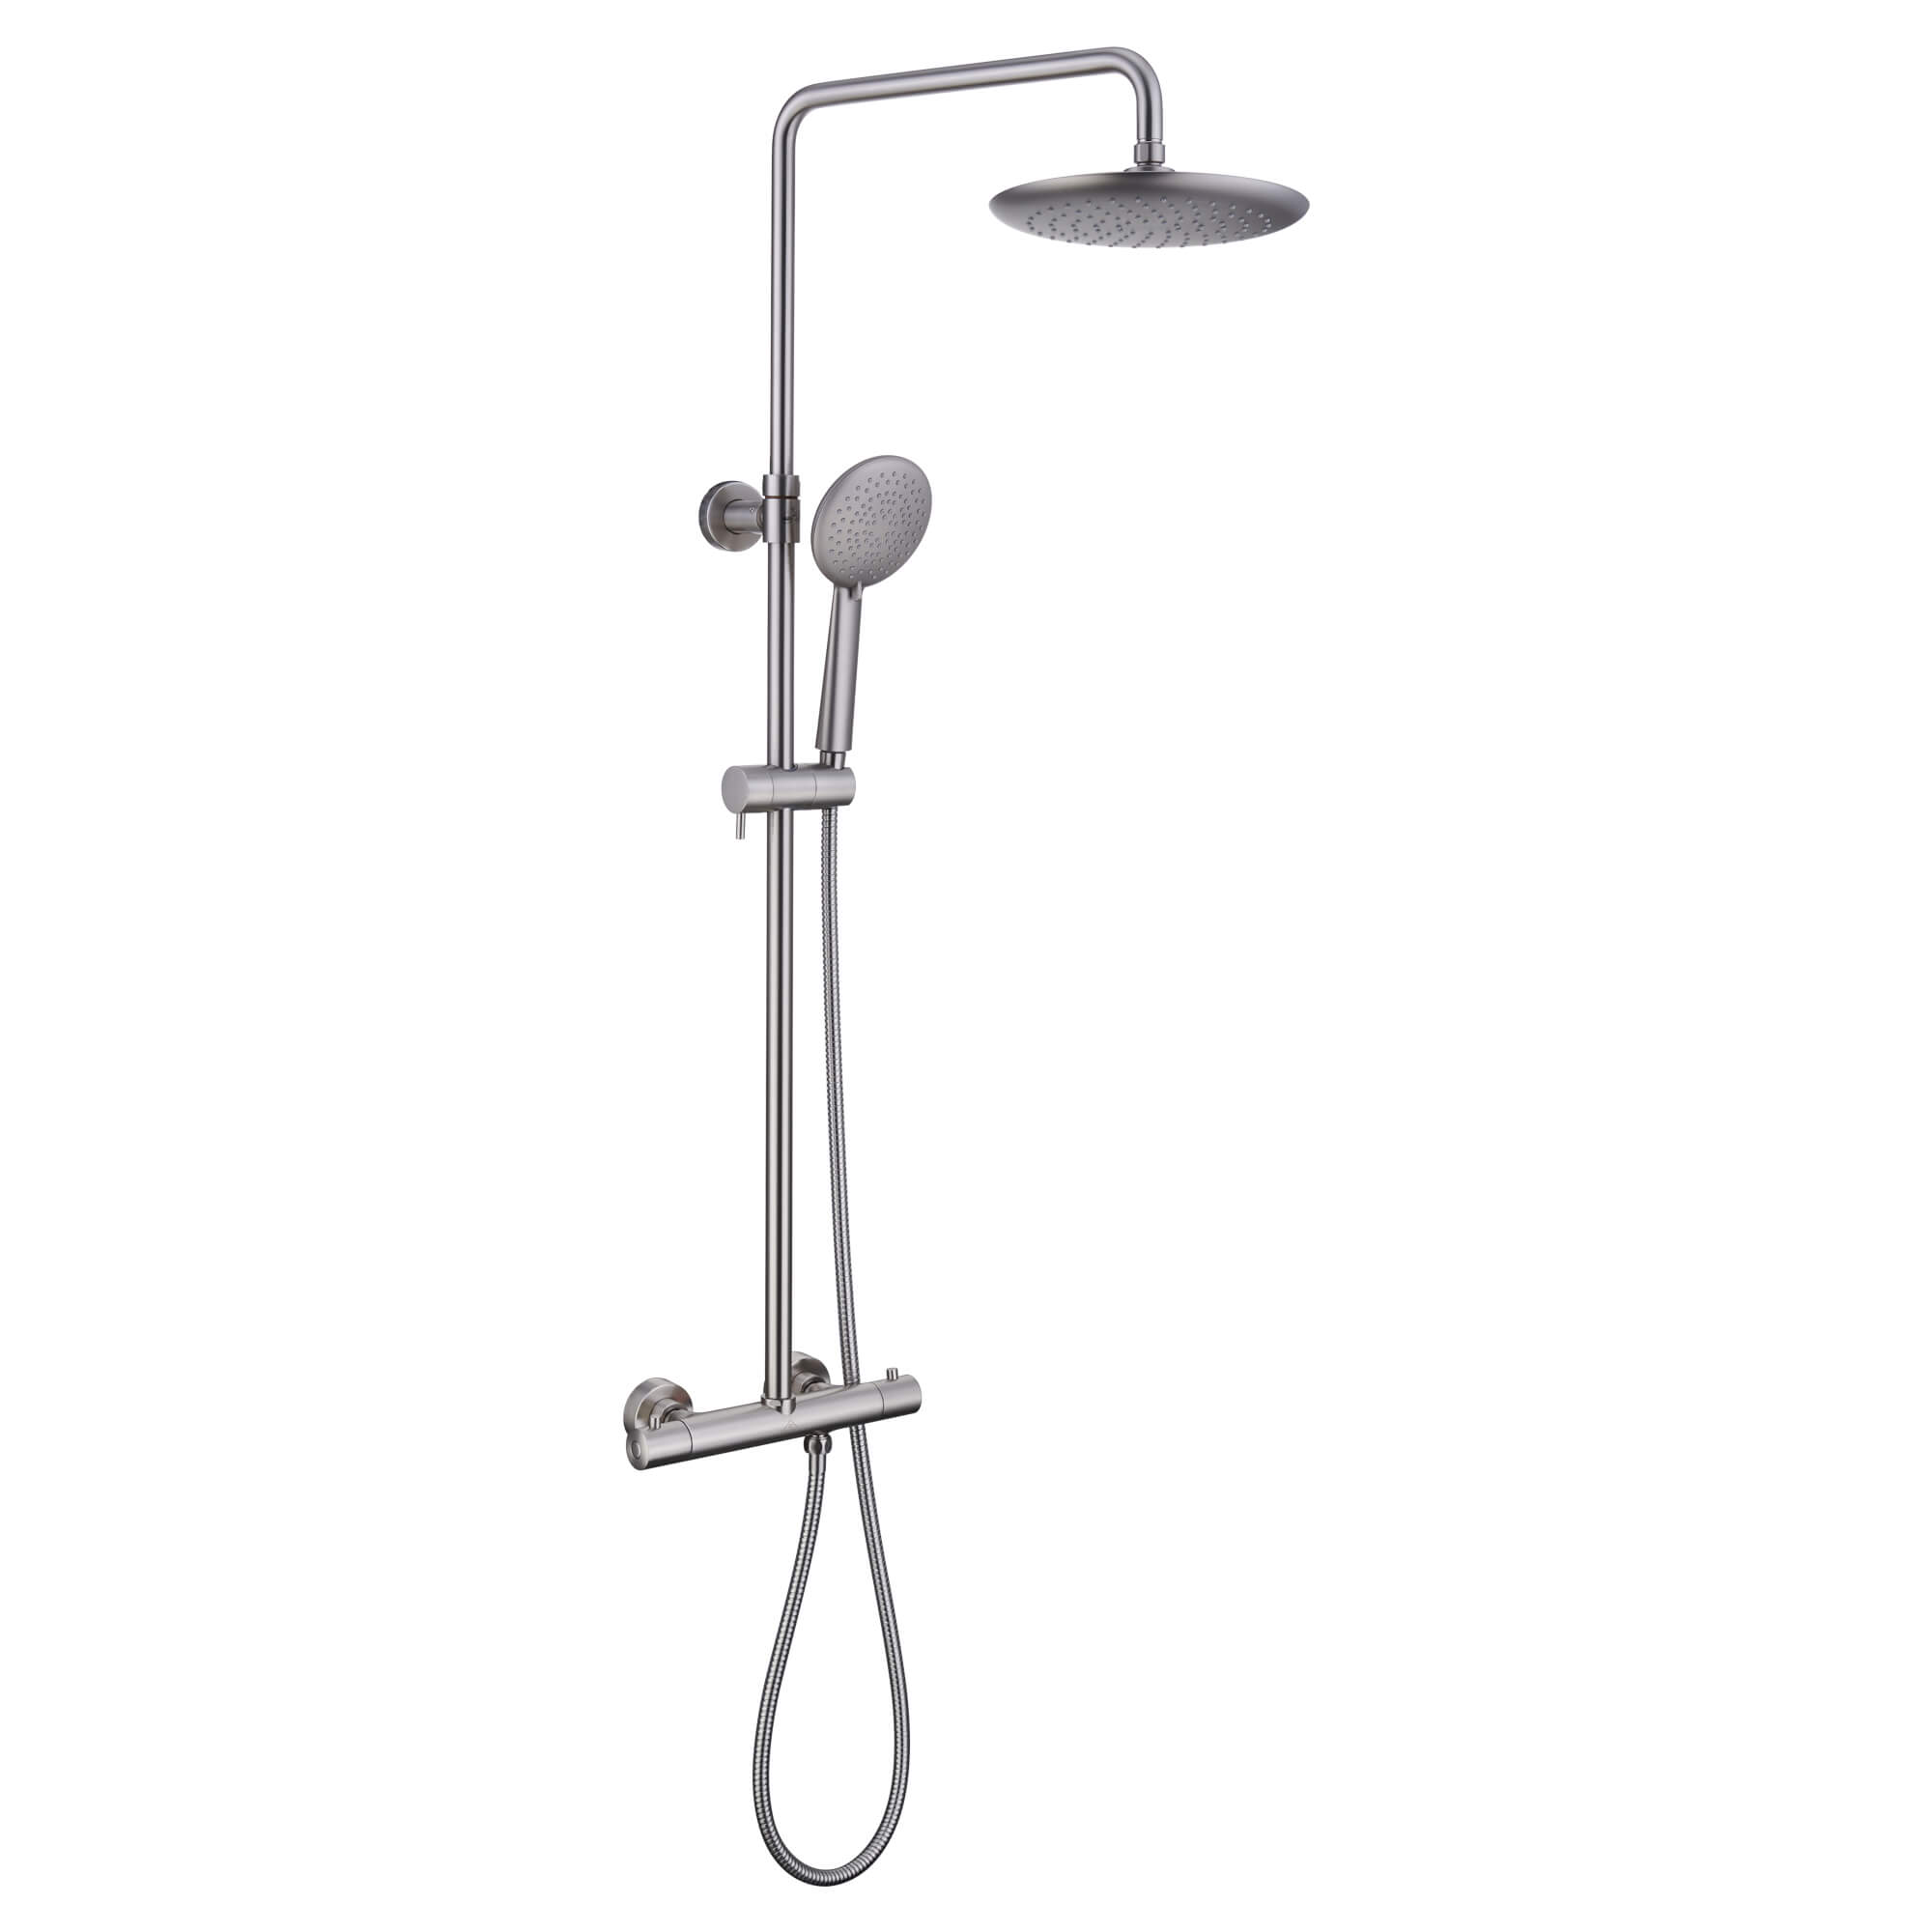 CASAINC Brushed Nickel Thermostatic Rainfall Shower System with Hand-Held Shower-Casainc Canada